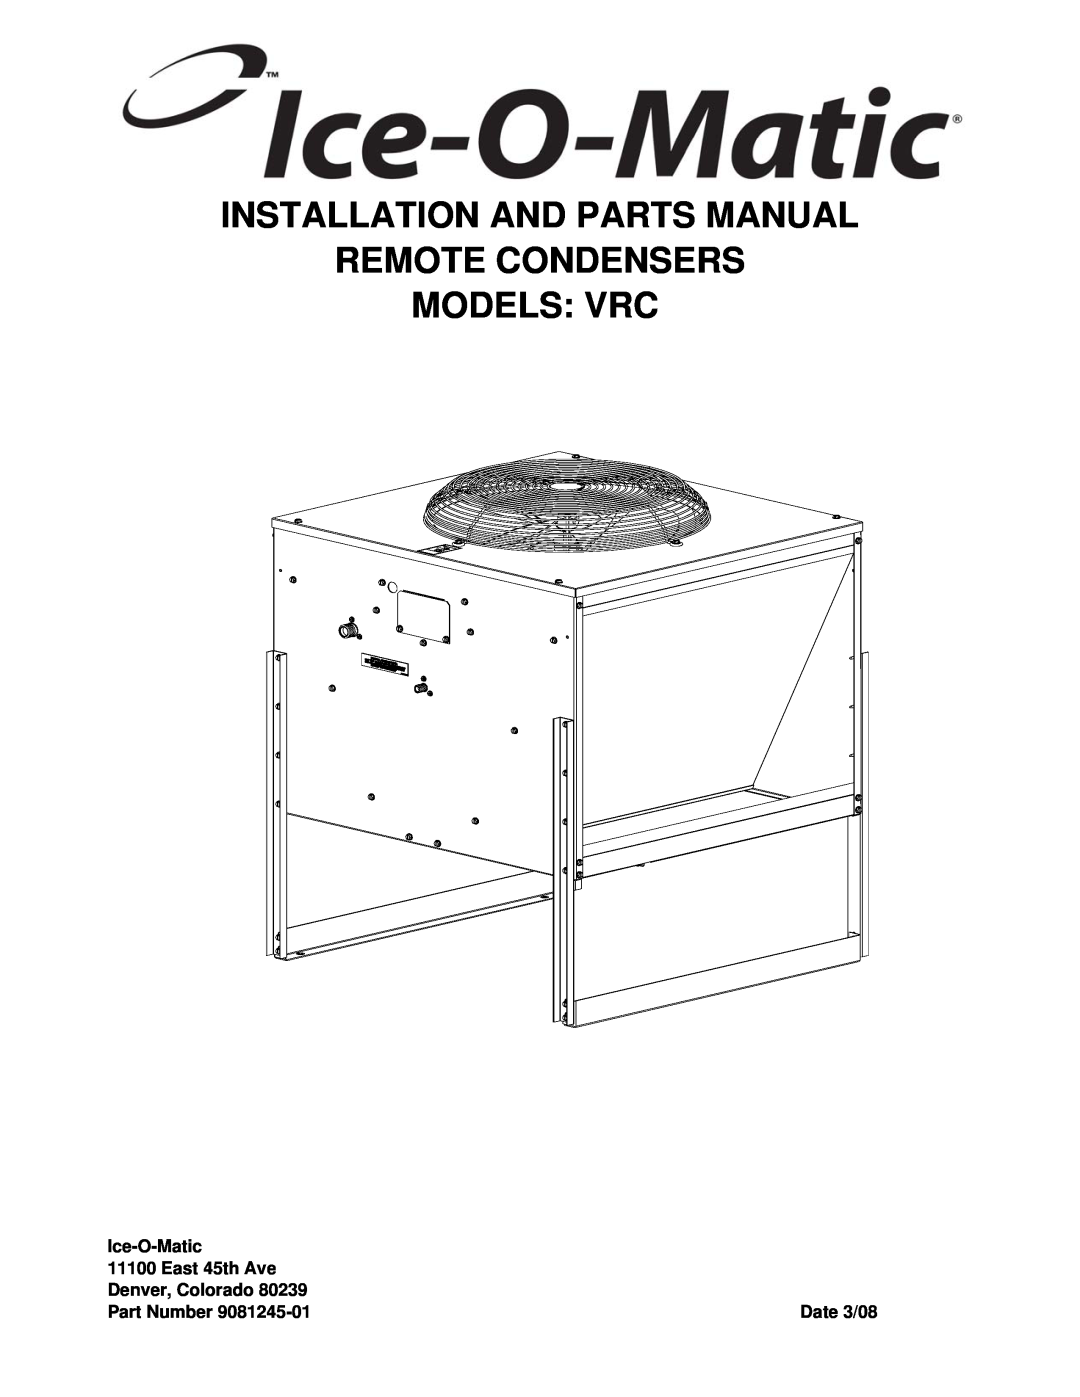 Ice-O-Matic VRC manual Installation And Parts Manual Remote Condensers, Models Vrc, Ice-O-Matic, East 45th Ave, Date 3/08 